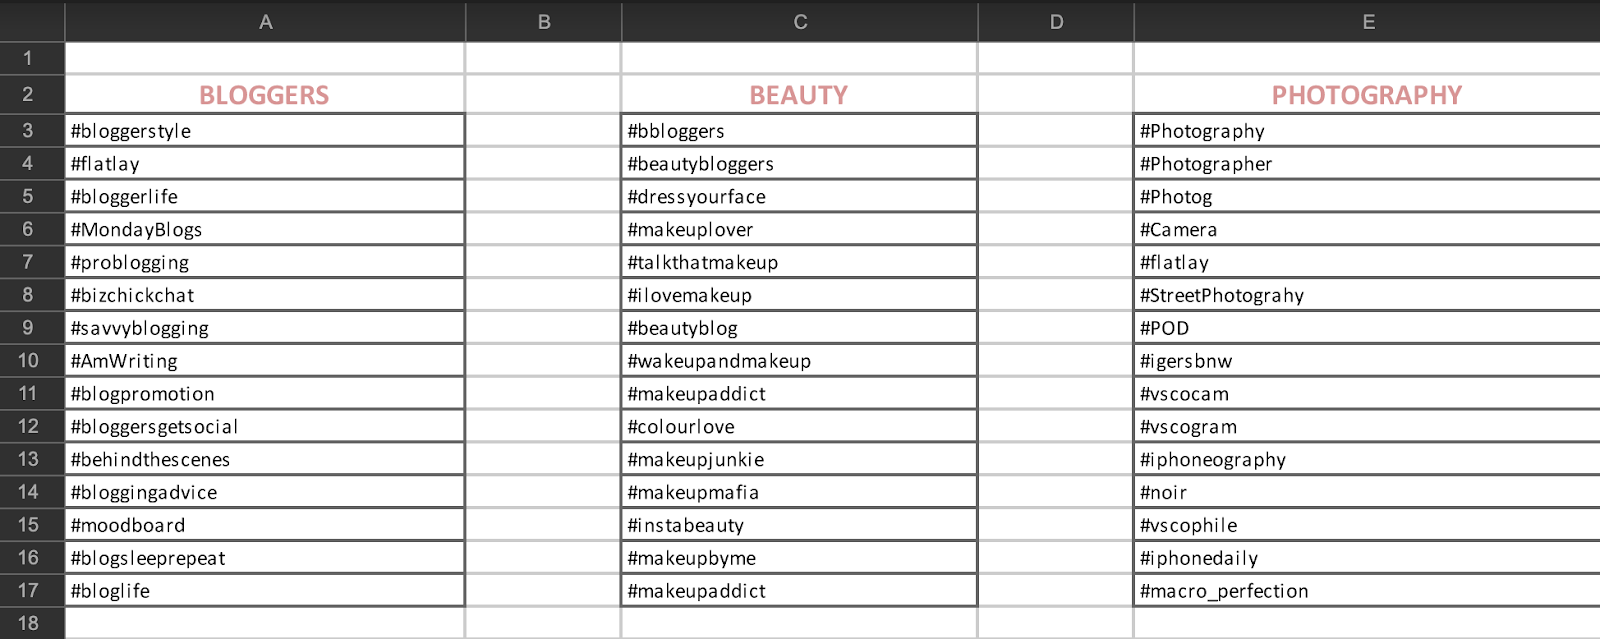 A glimpse of a hashtag library by Helene containing thousands of hashtags. 